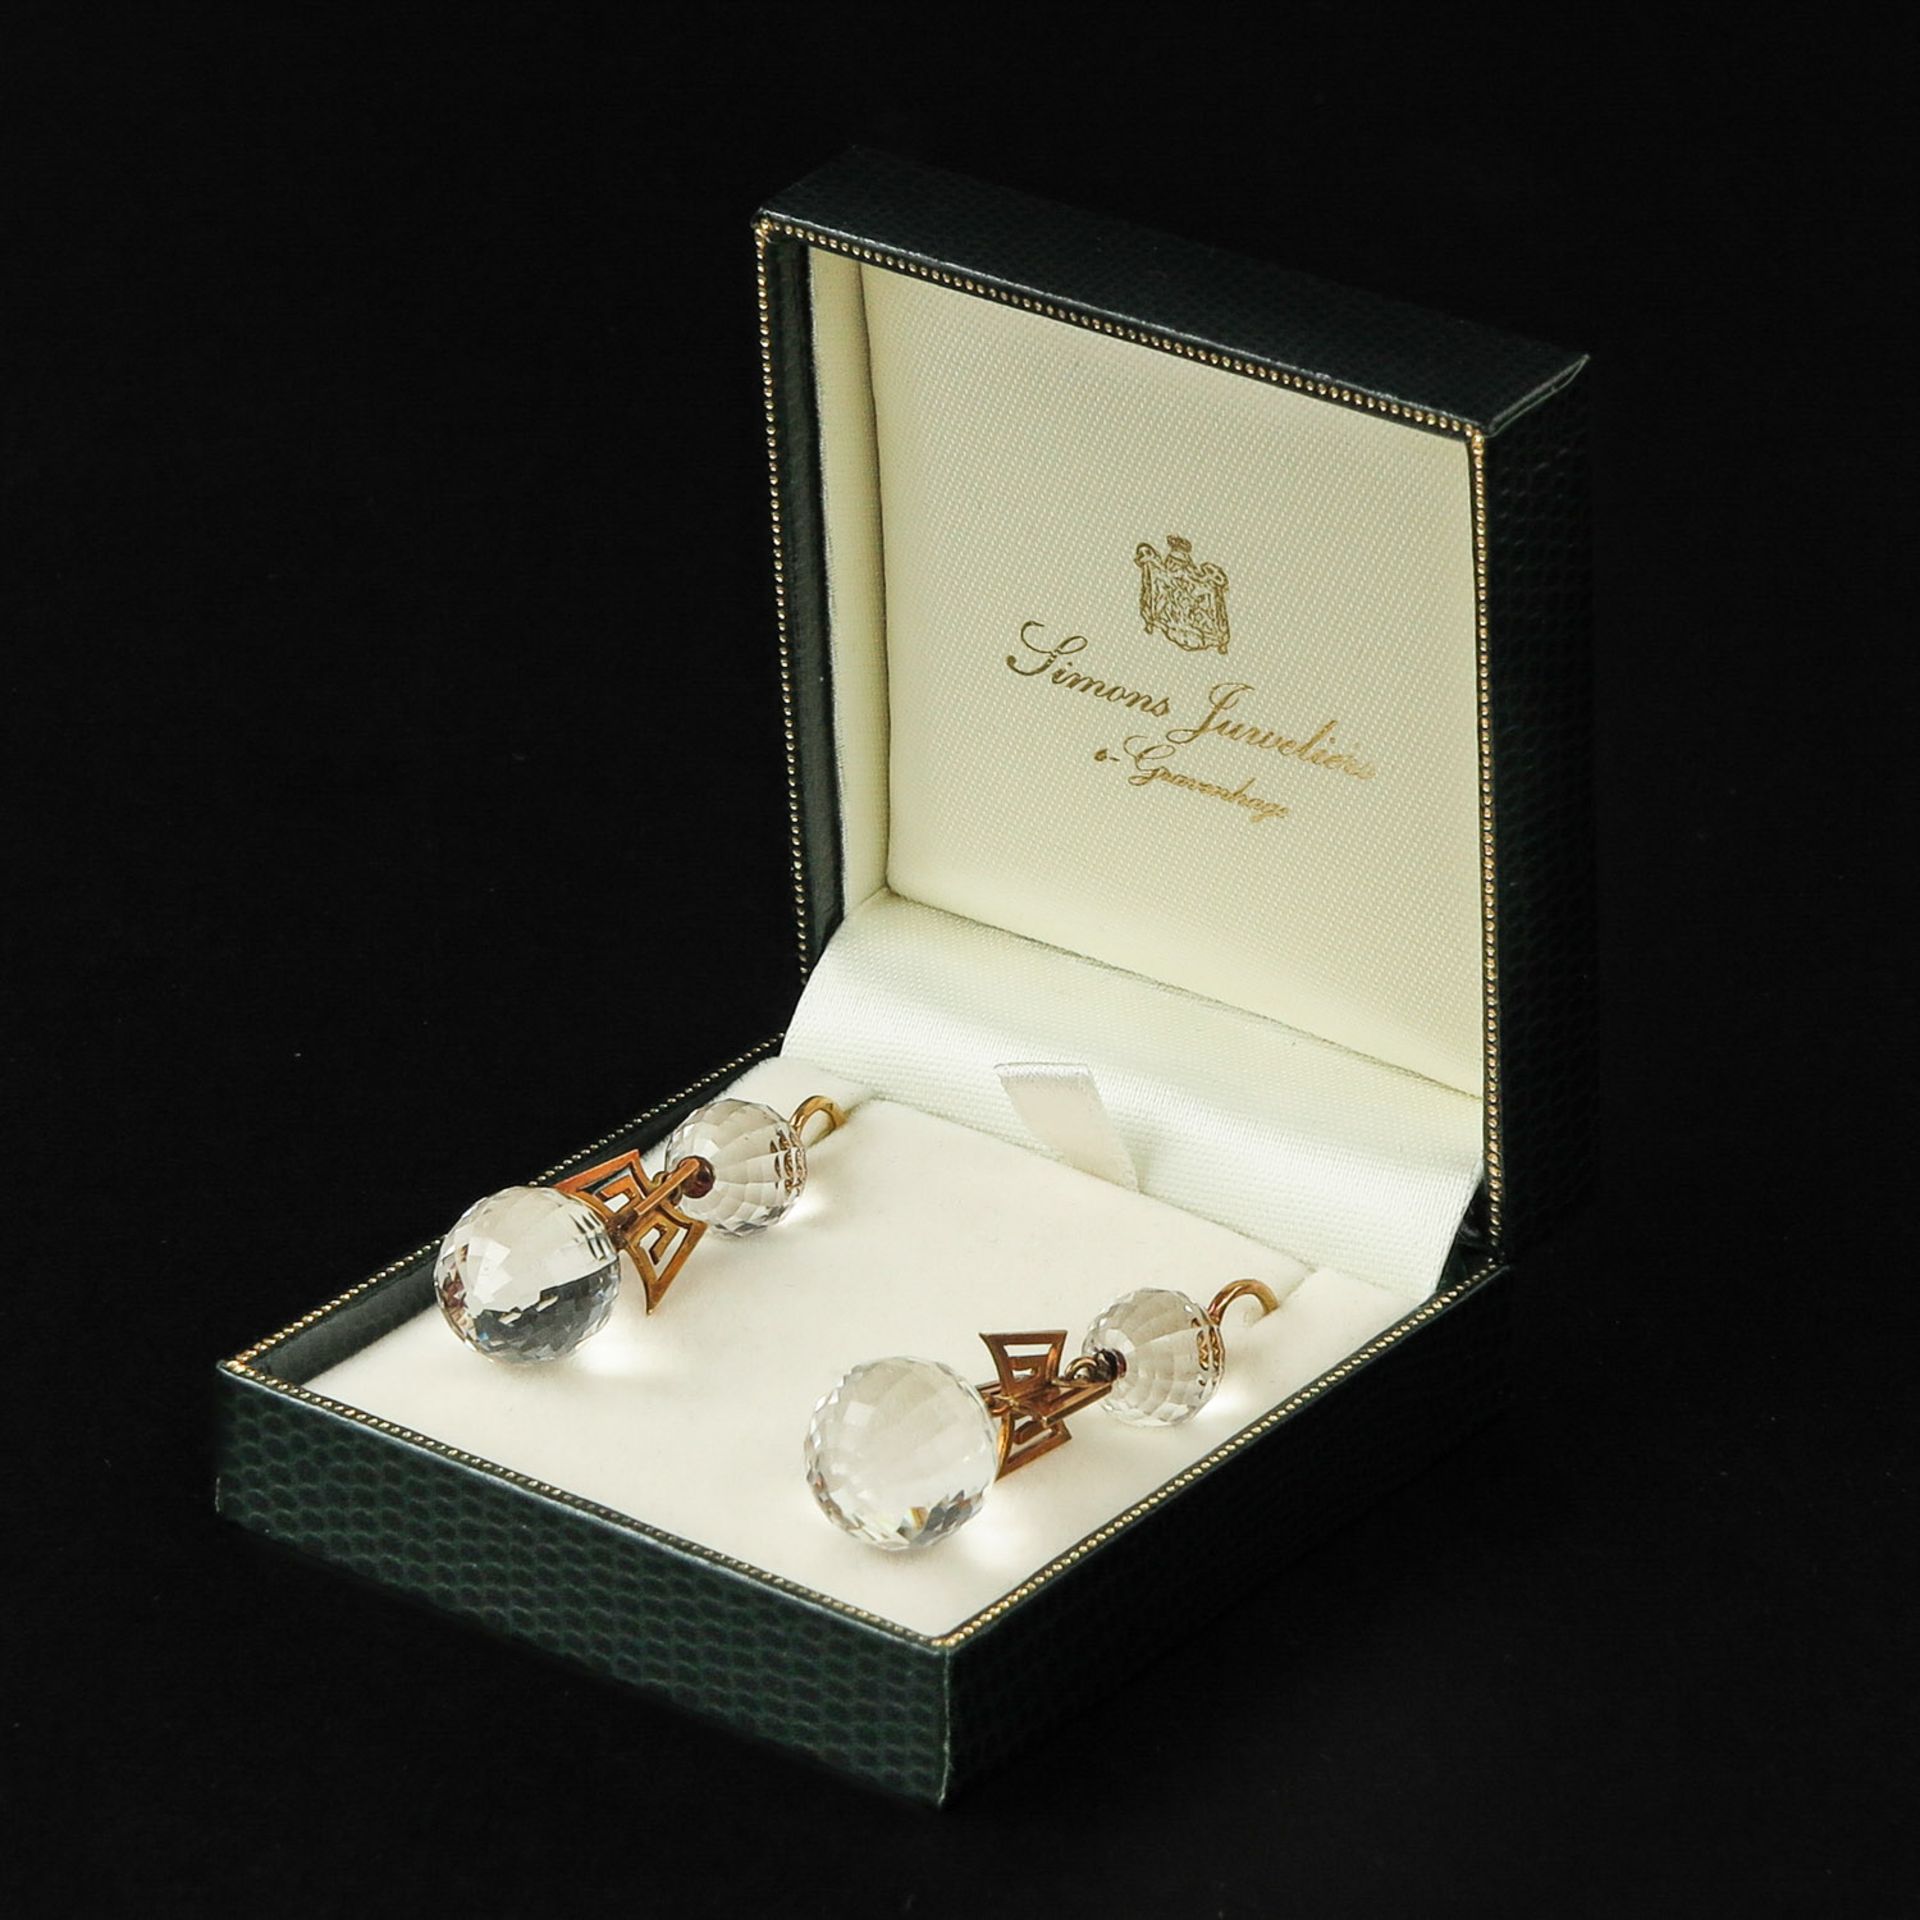 A Pair of Earring Set with Rock Crystal - Image 4 of 4